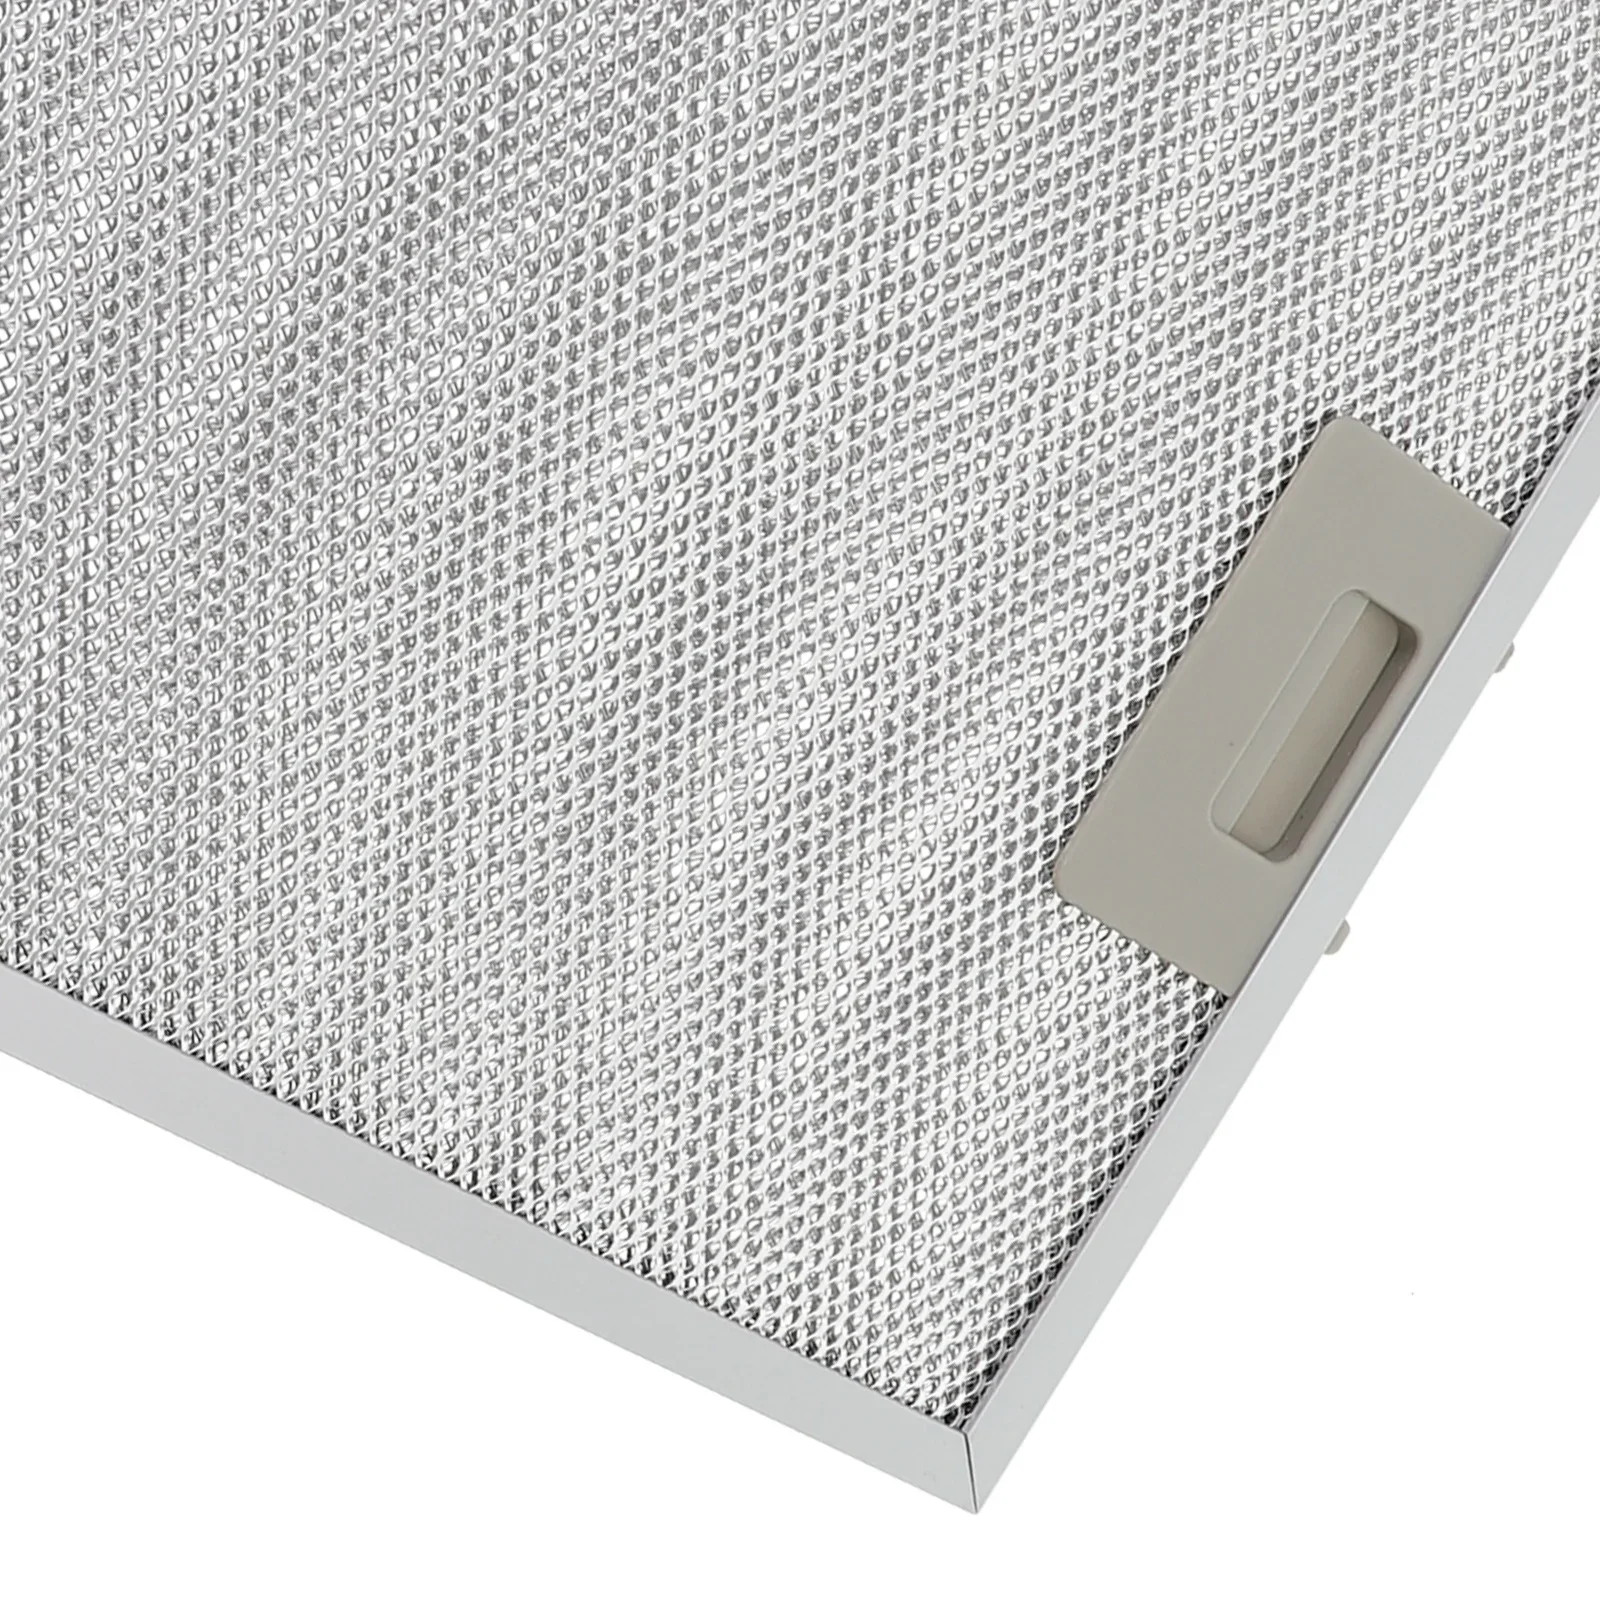 

Aluminized Grease Filtration Silver Cooker Hood Filters 305 X 267 X 9mm Maintain Fresh Air Replace Every 3 6 Months